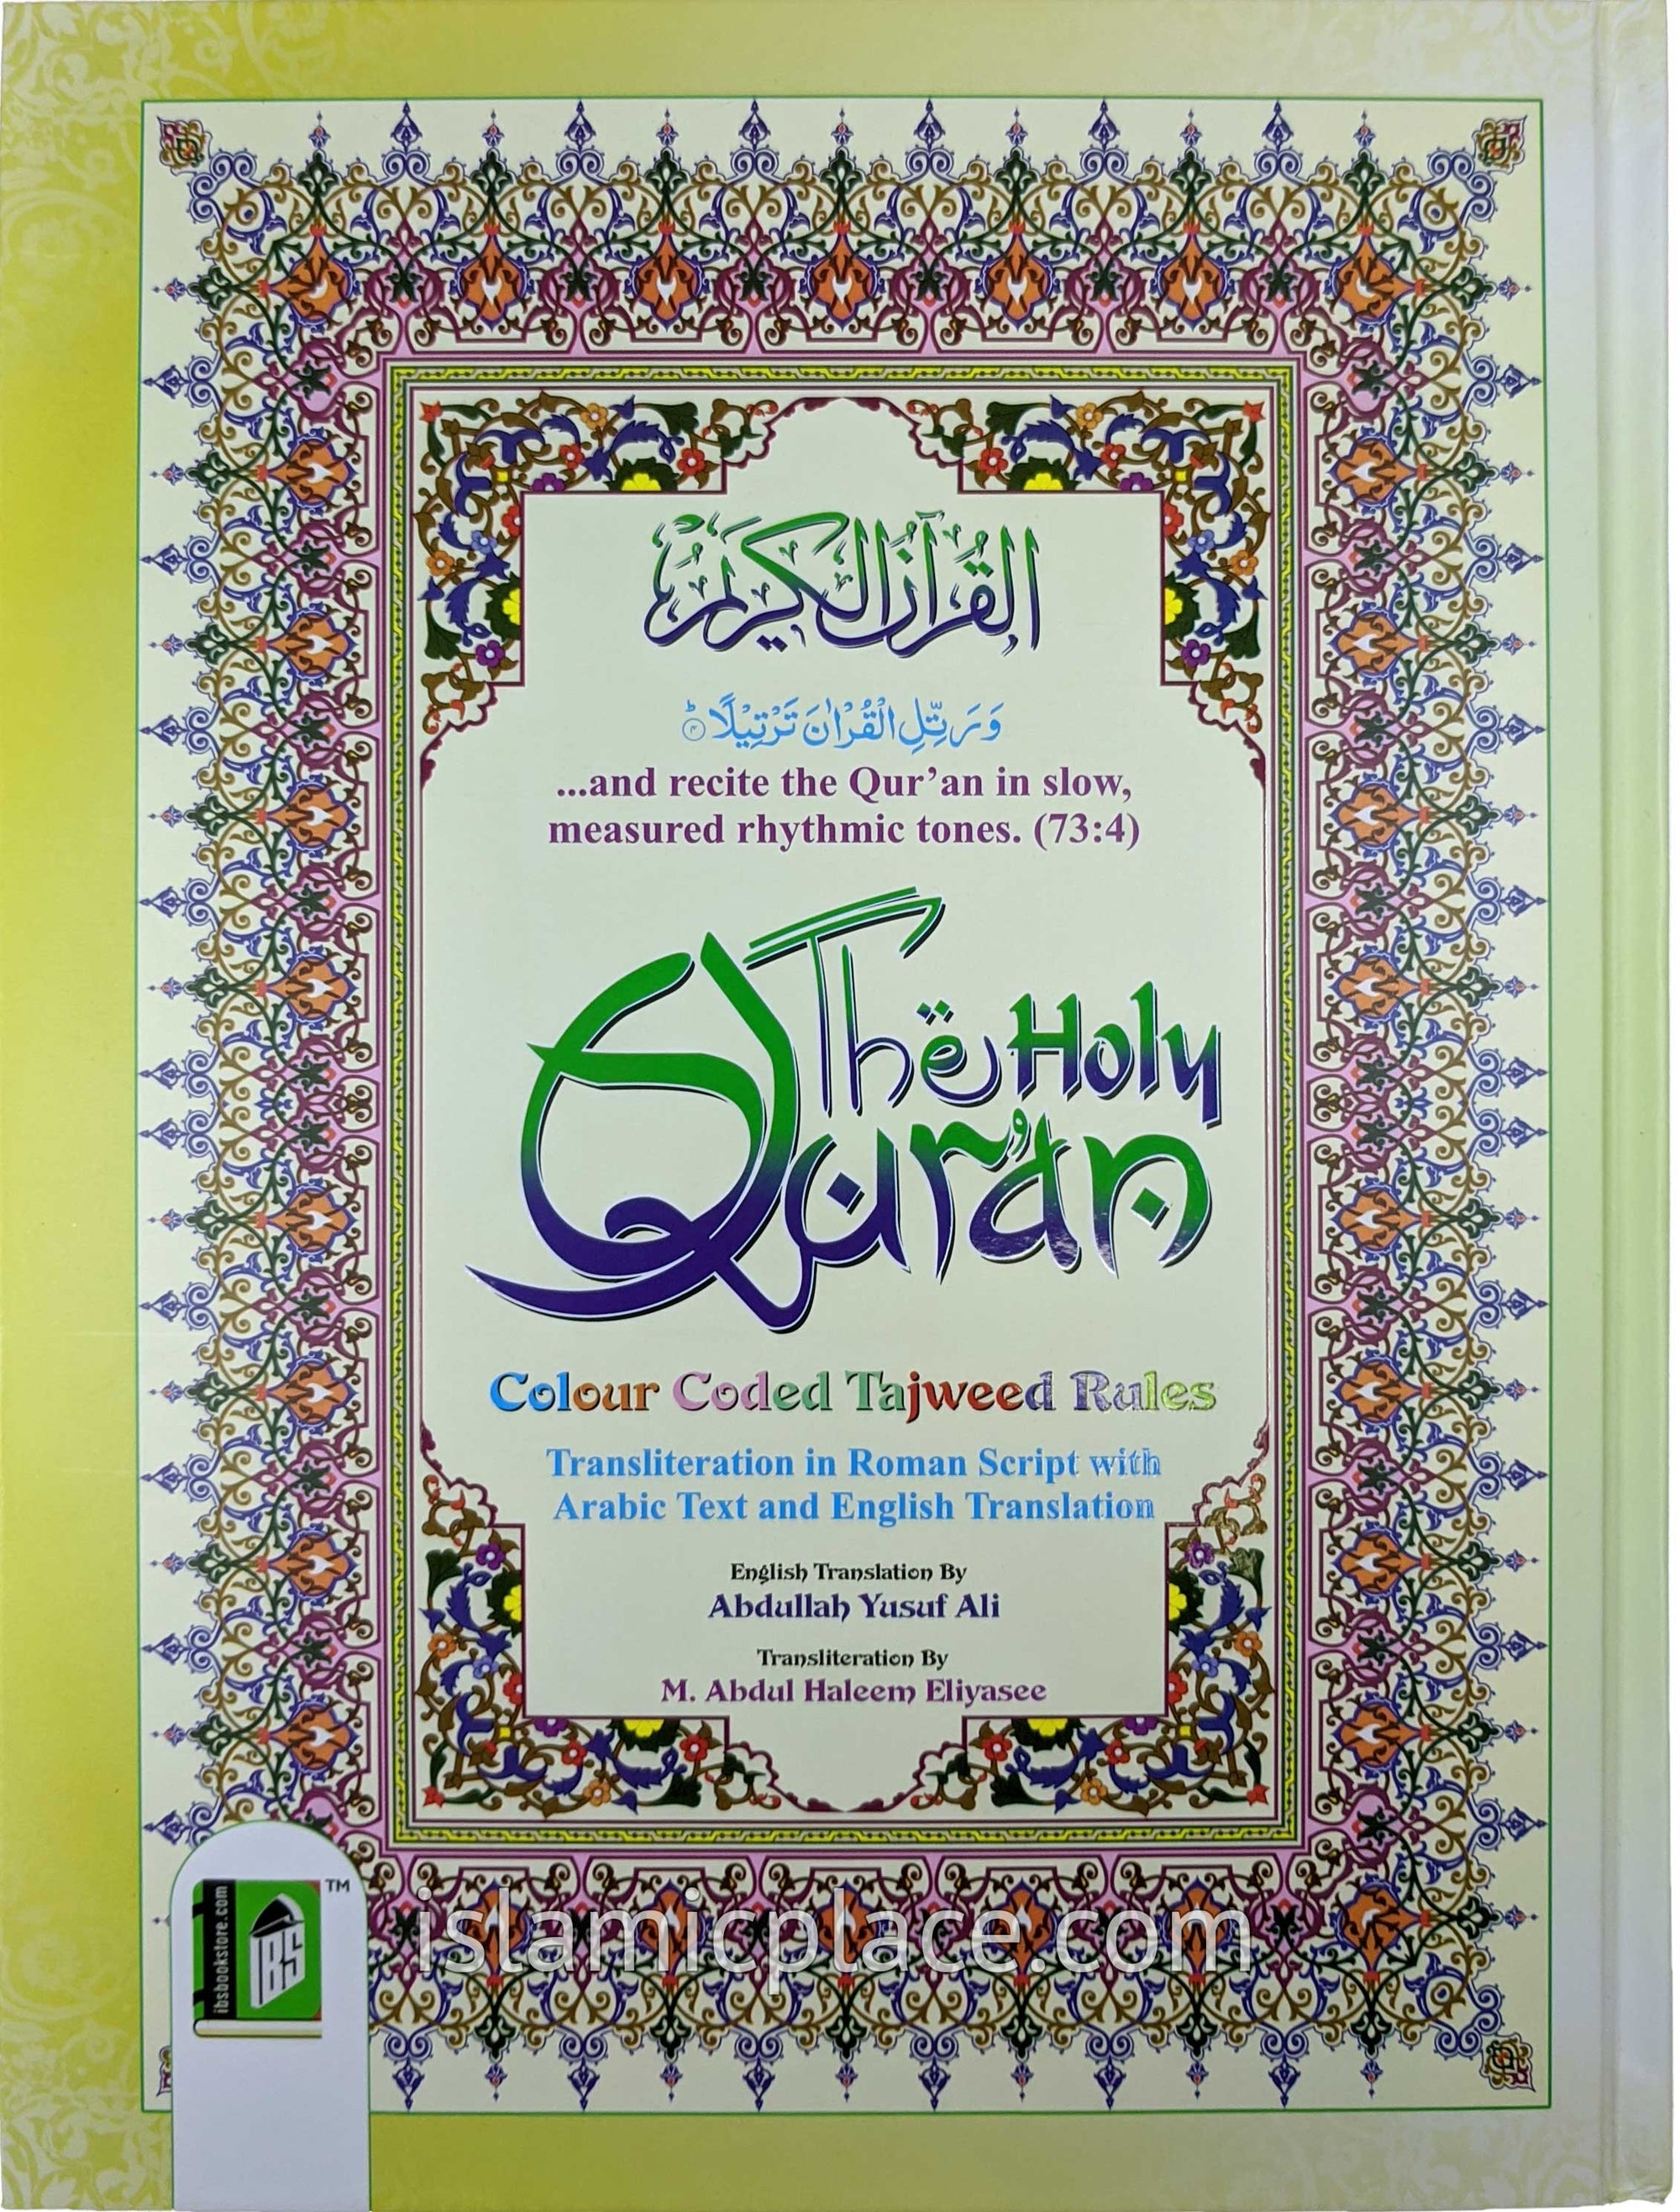 The Holy Quran Color Coded Tajweed Rules Transliteration in Roman Script with Arabic Text and English Translation